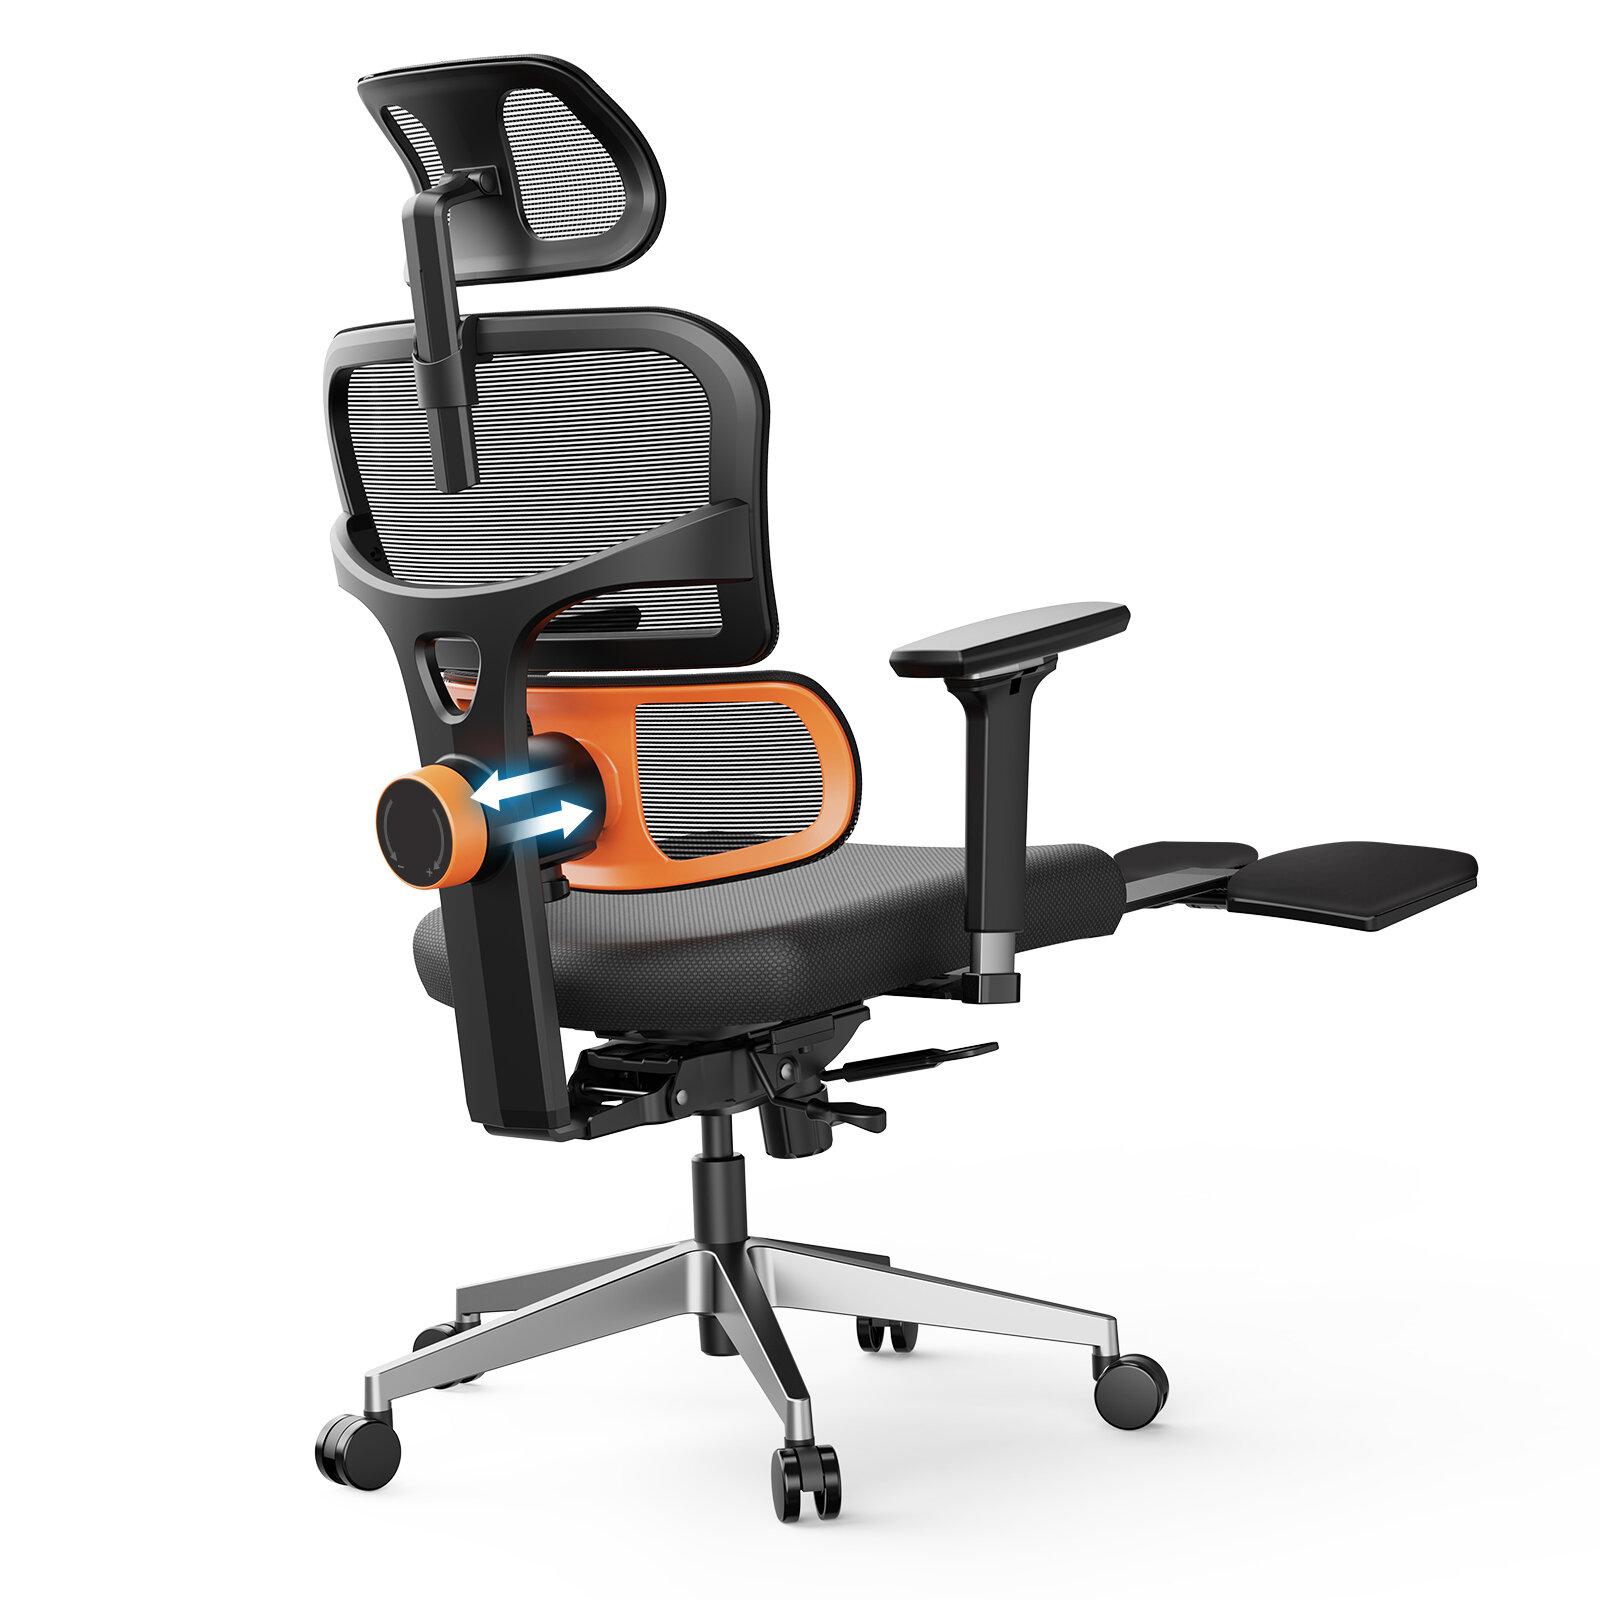 Image of [PRO VERSION] NEWTRAL Ergonomic Office Chair with Footrest High Back Desk Chair with Unique Adjustable Lumbar Support B